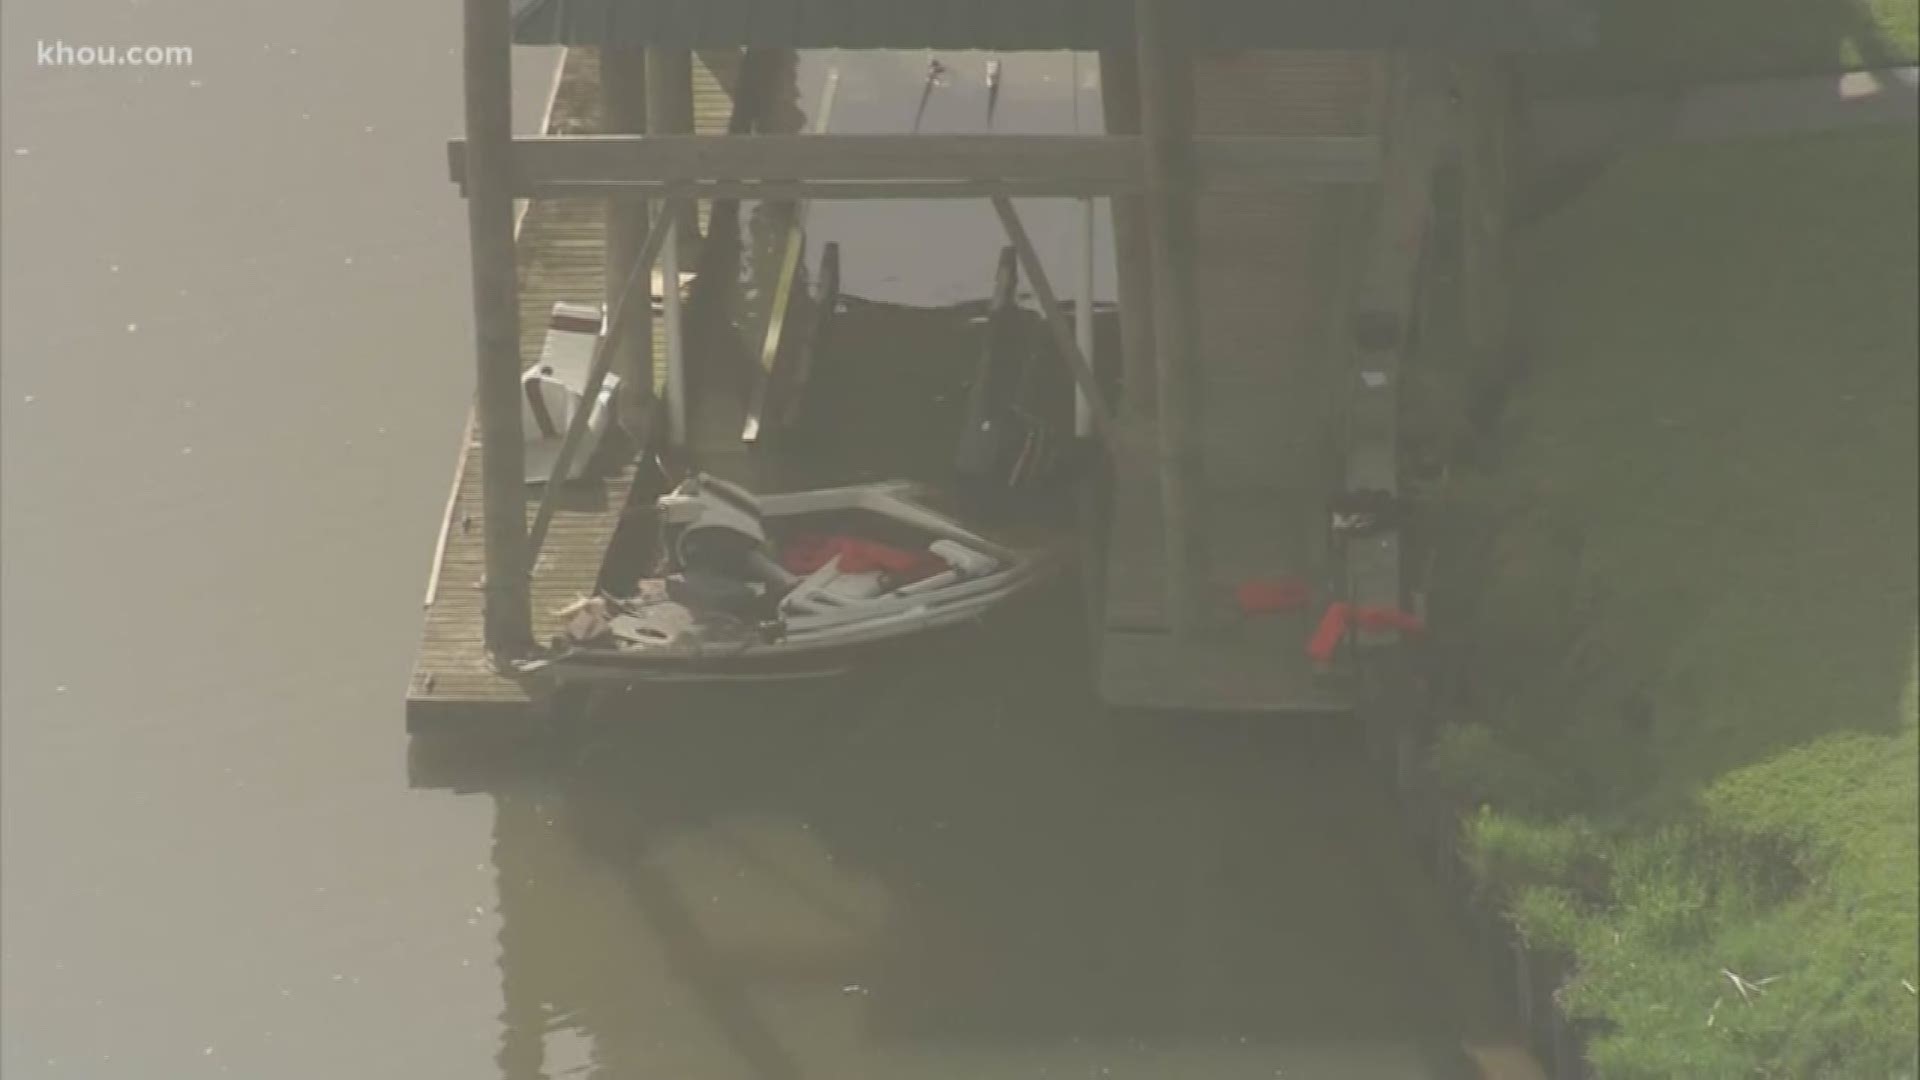 One person went missing and two people were injured in a boating crash in east Harris County late Sunday, Sheriff Ed Gonzalez said in a Tweet.